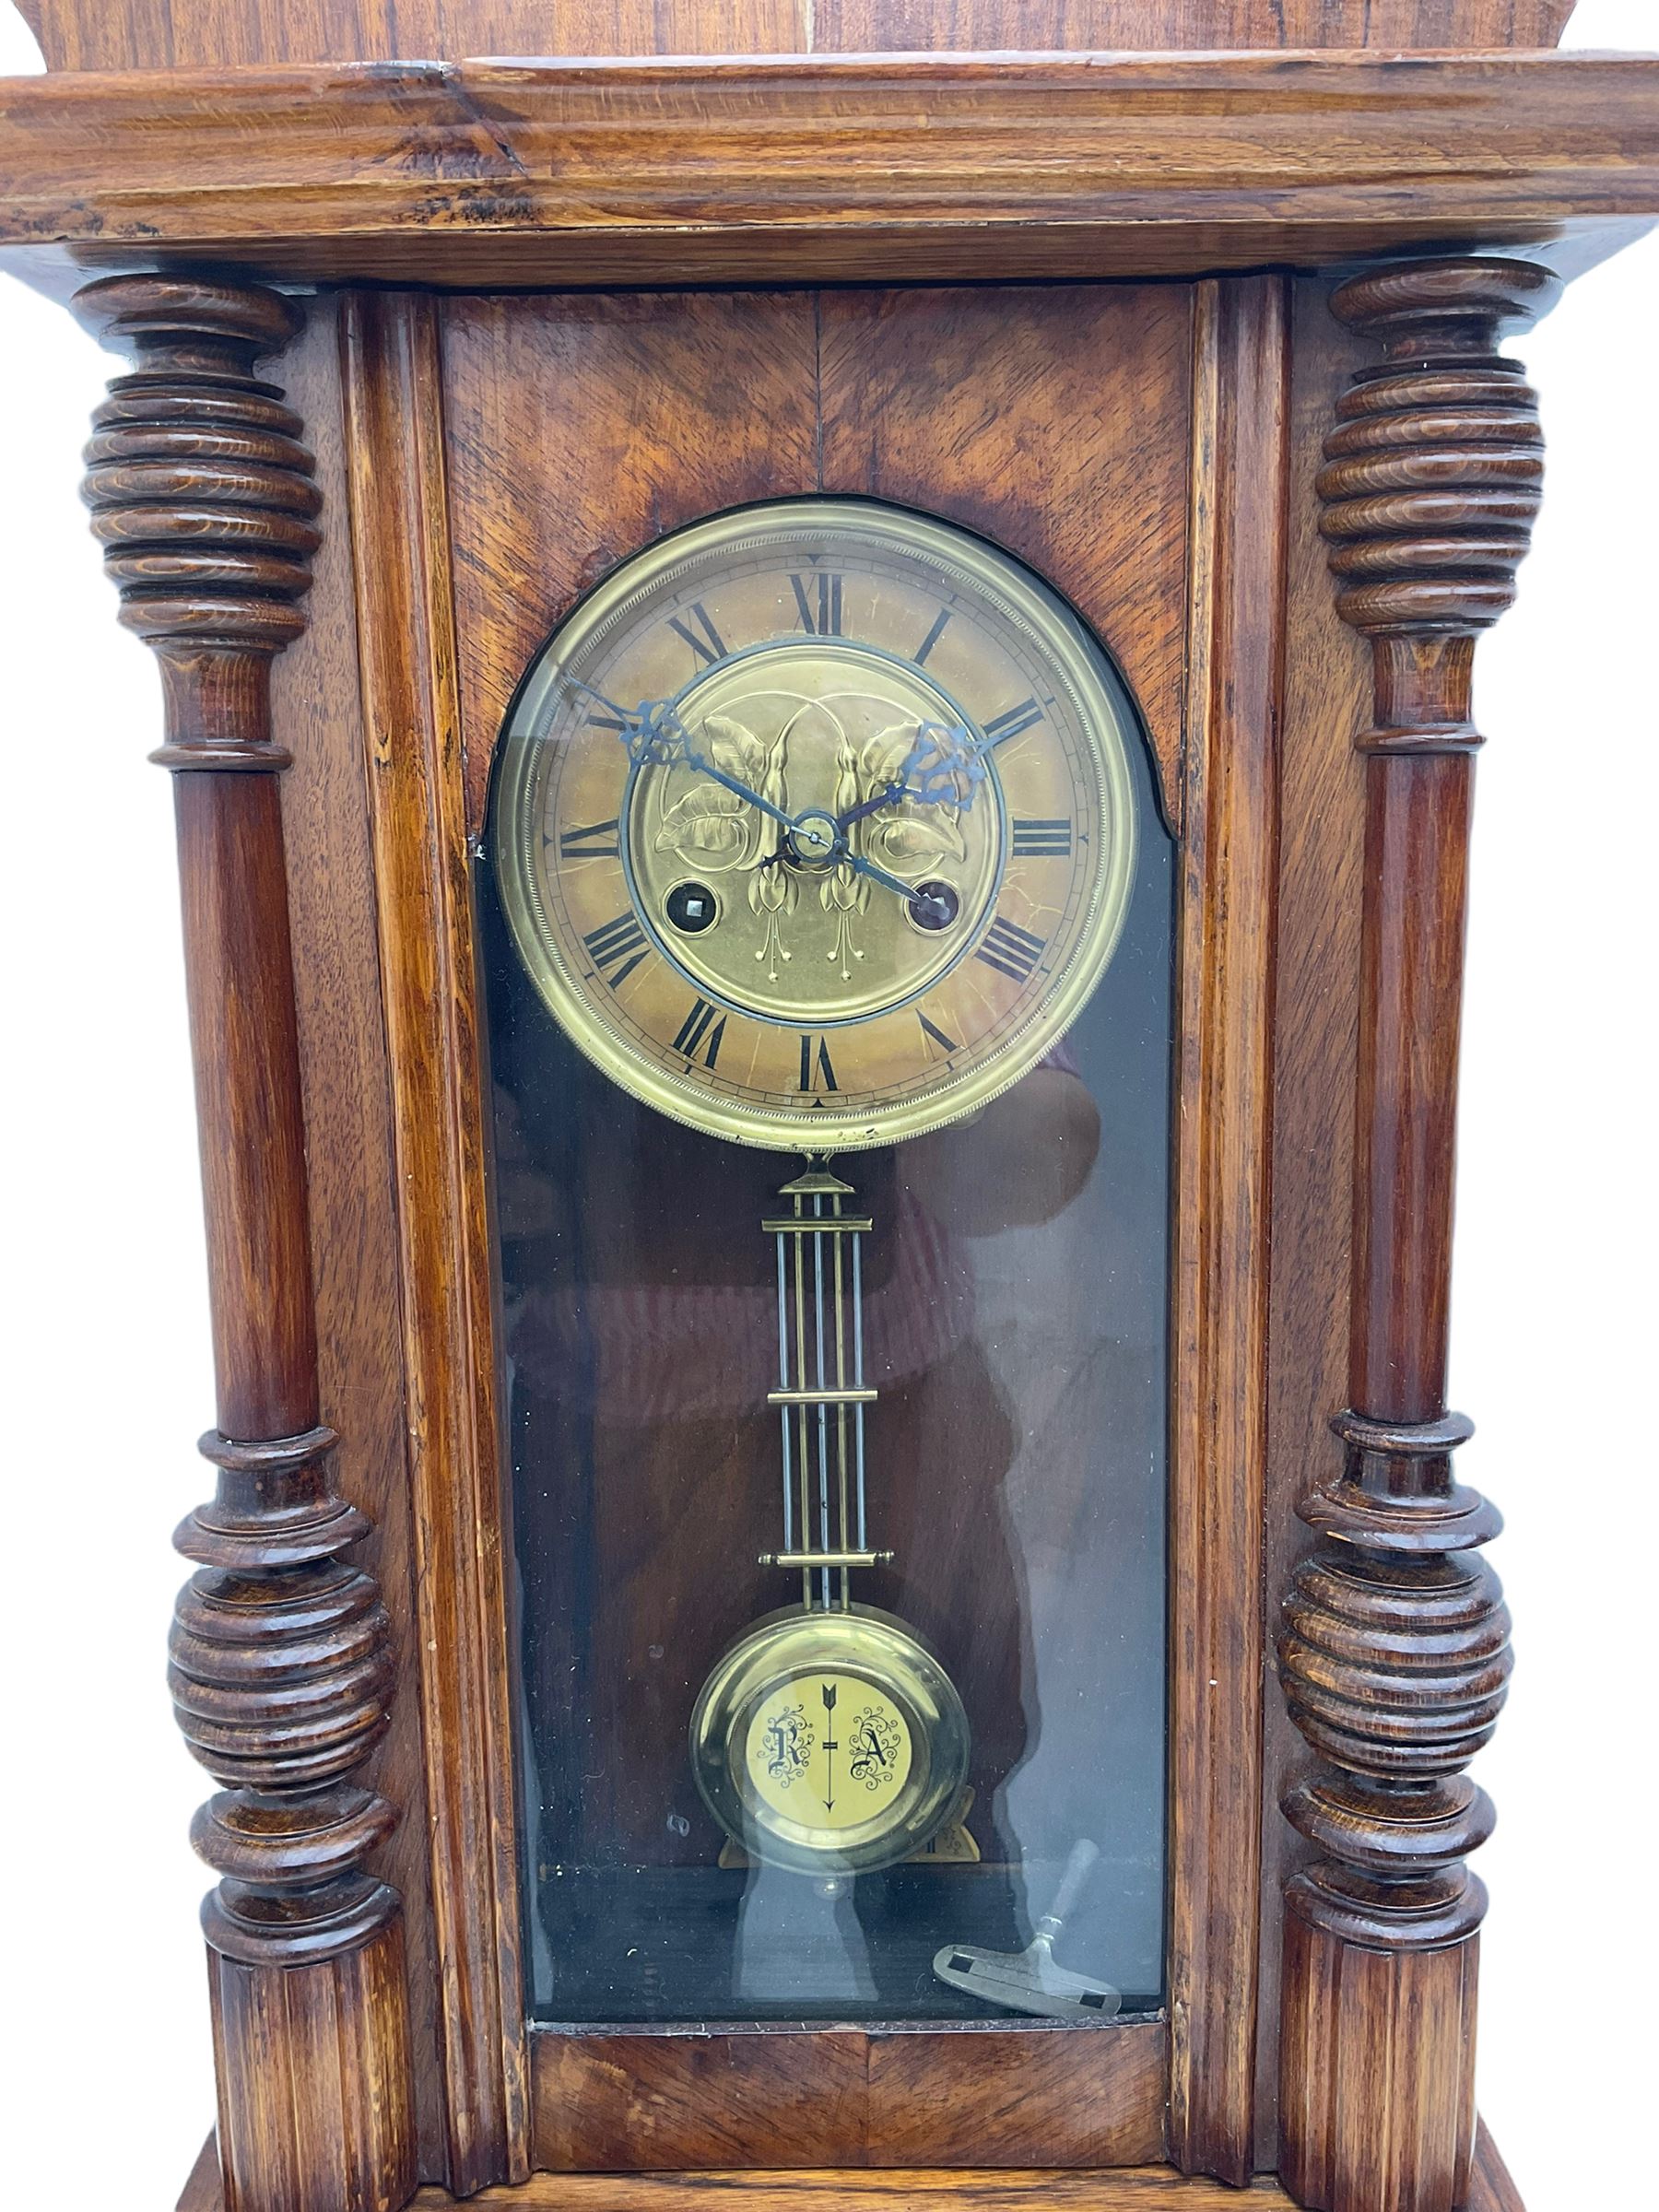 German early 20th century wall clock in a mahogany case with an architectural pediment and turned fi - Image 4 of 4